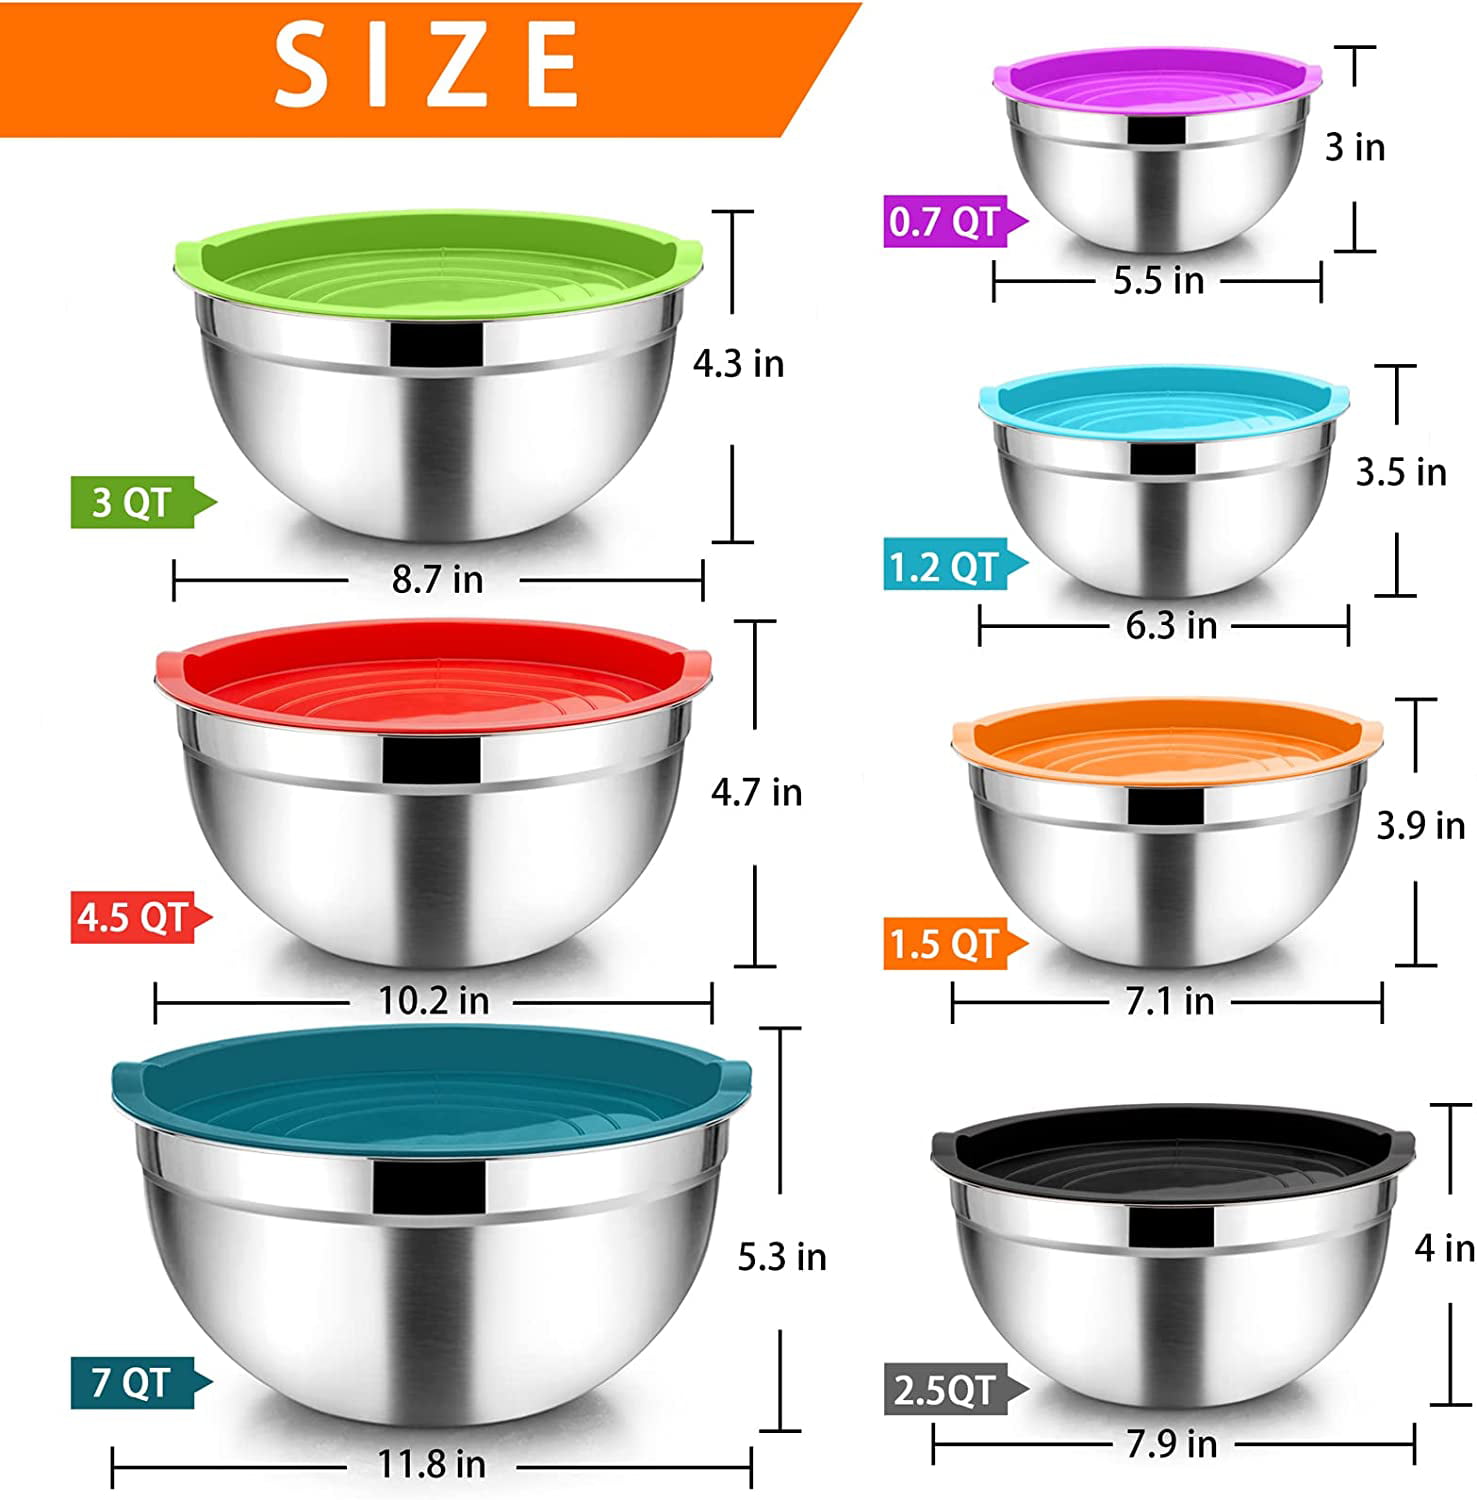 EHOMEA2Z Mixing Bowls Metal Stainless Steel Set (7 Pack) Kitchen Nesting  Bowls for Space Saving Storage Gadgets, Baking, Cooking, Breader Bowl